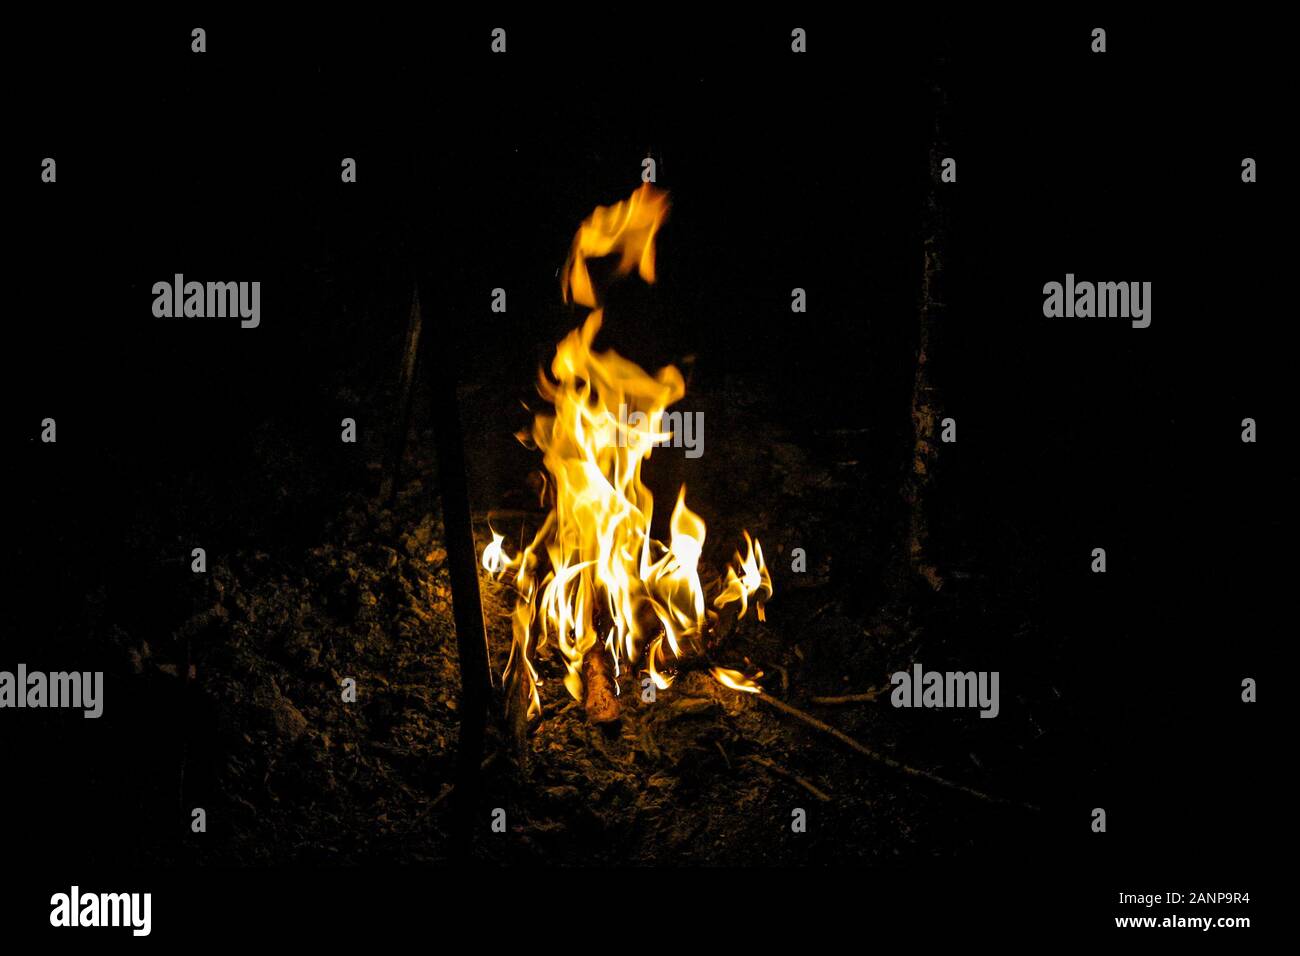 Fire flames in the dark image of a campfire at night isolated on the black background Stock Photo